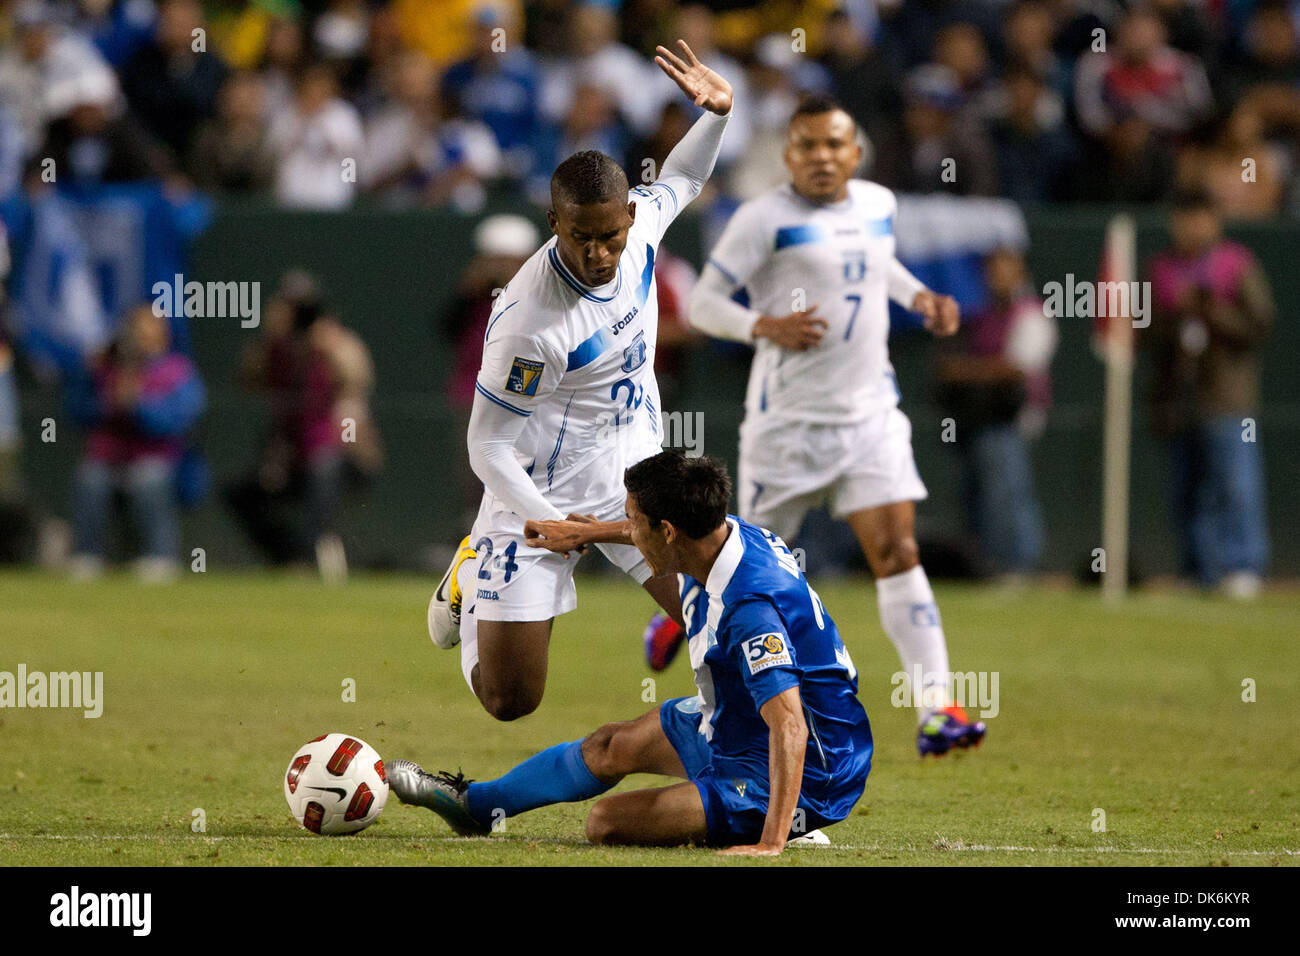 June 6, 2011 - Carson, California, U.S - Honduras Brayan Beckeles defender #24 (back) and Guatemala midfielder Jonathan Lopez #24 (front) in action during the 2011 CONCACAF Gold Cup group B game between Honduras and Guatemala at the Home Depot Center. (Credit Image: © Brandon Parry/Southcreek Global/ZUMAPRESS.com) Stock Photo